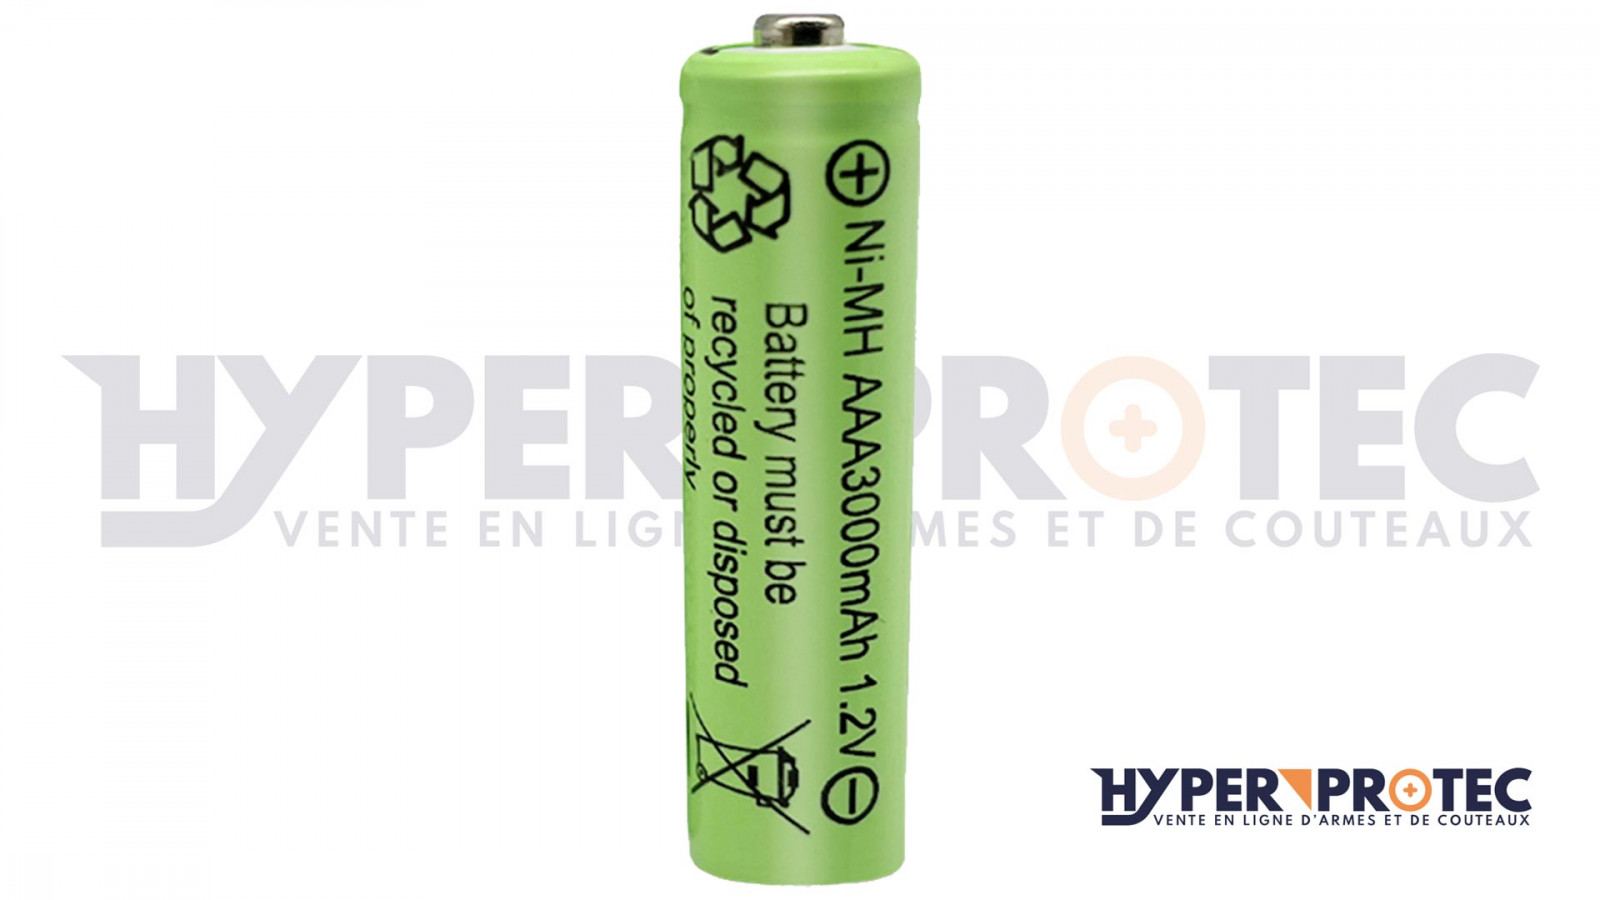 Pile rechargeable AAA LR3 1,2V : INDUCELL